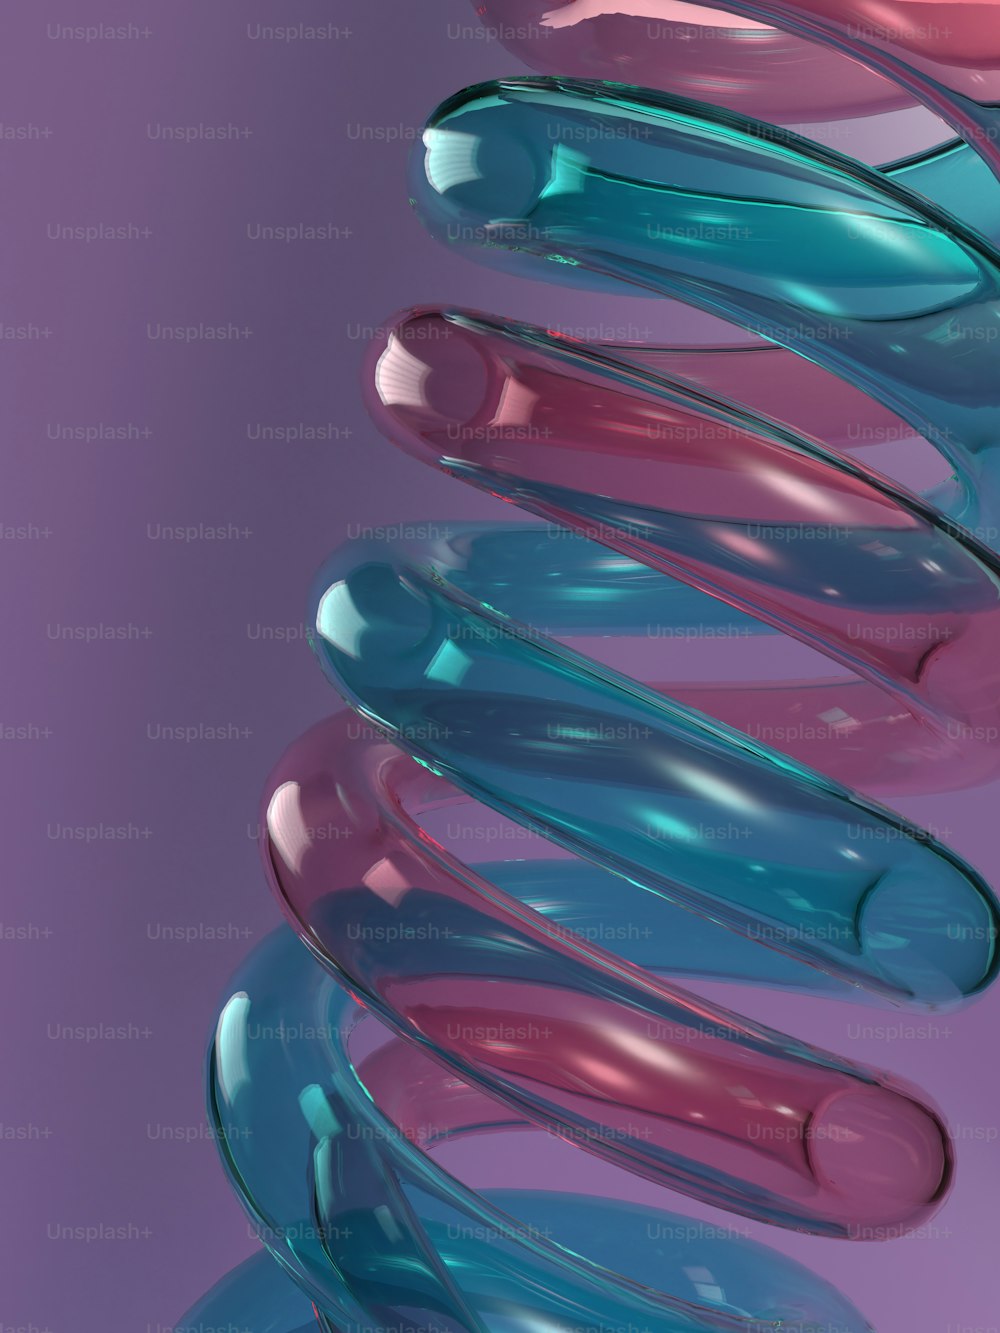 a spiral of glass on a purple and blue background